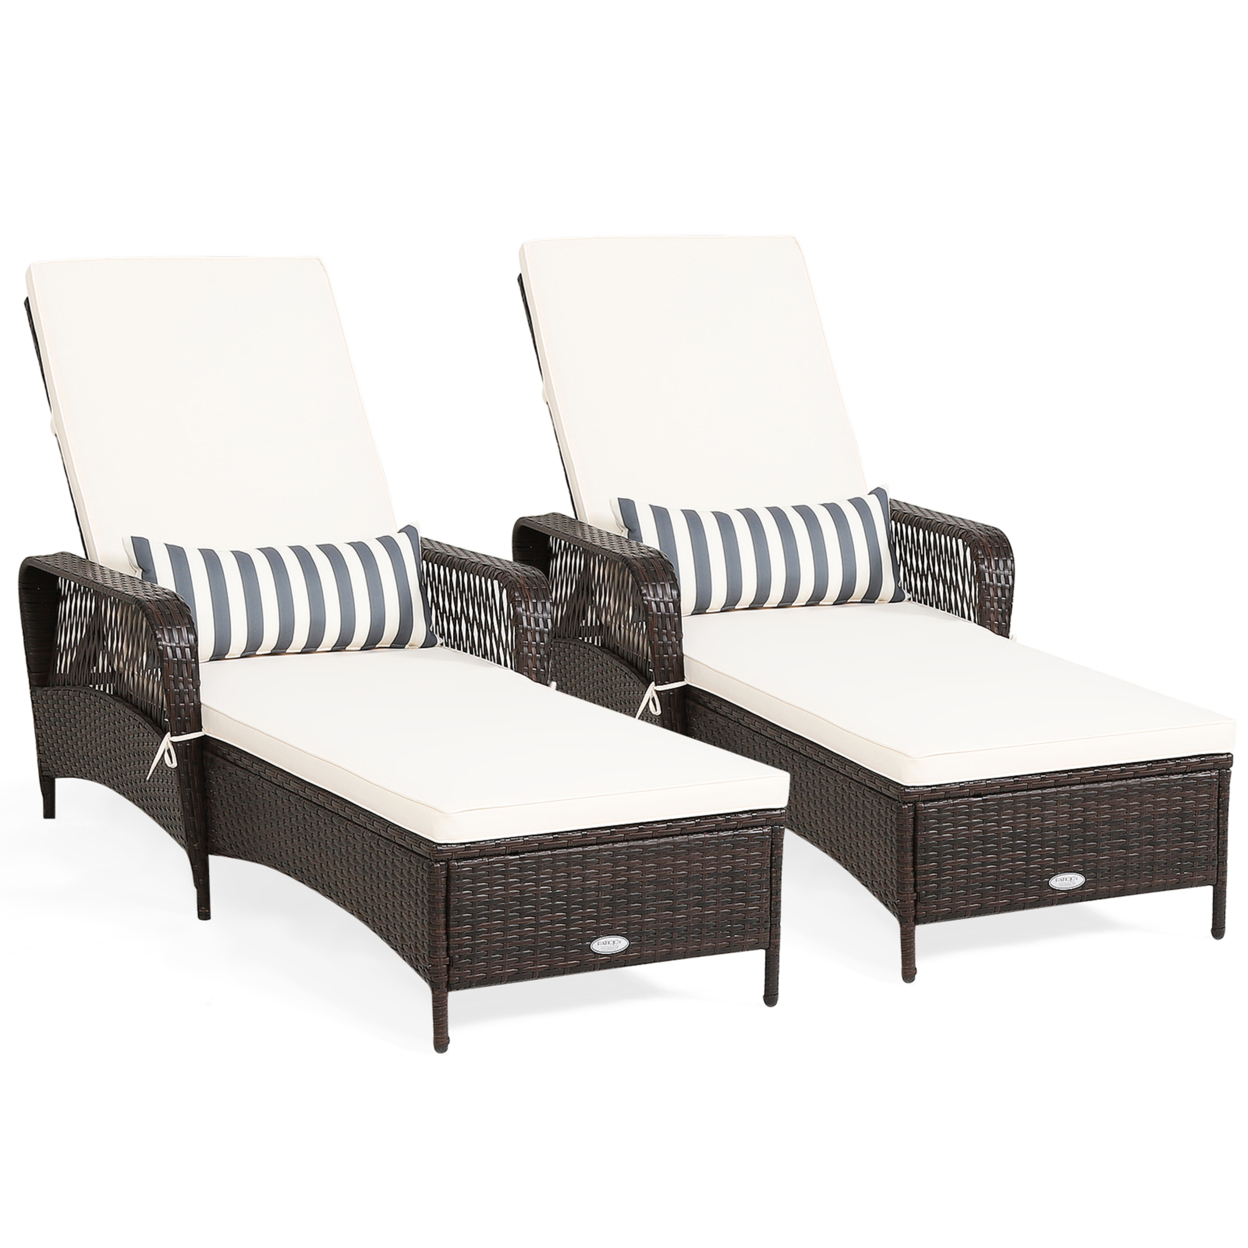 Set Of 2 Rattan Patio Lounge Chair Chaise W/ Adjustable Backrest Cushion & Pillow